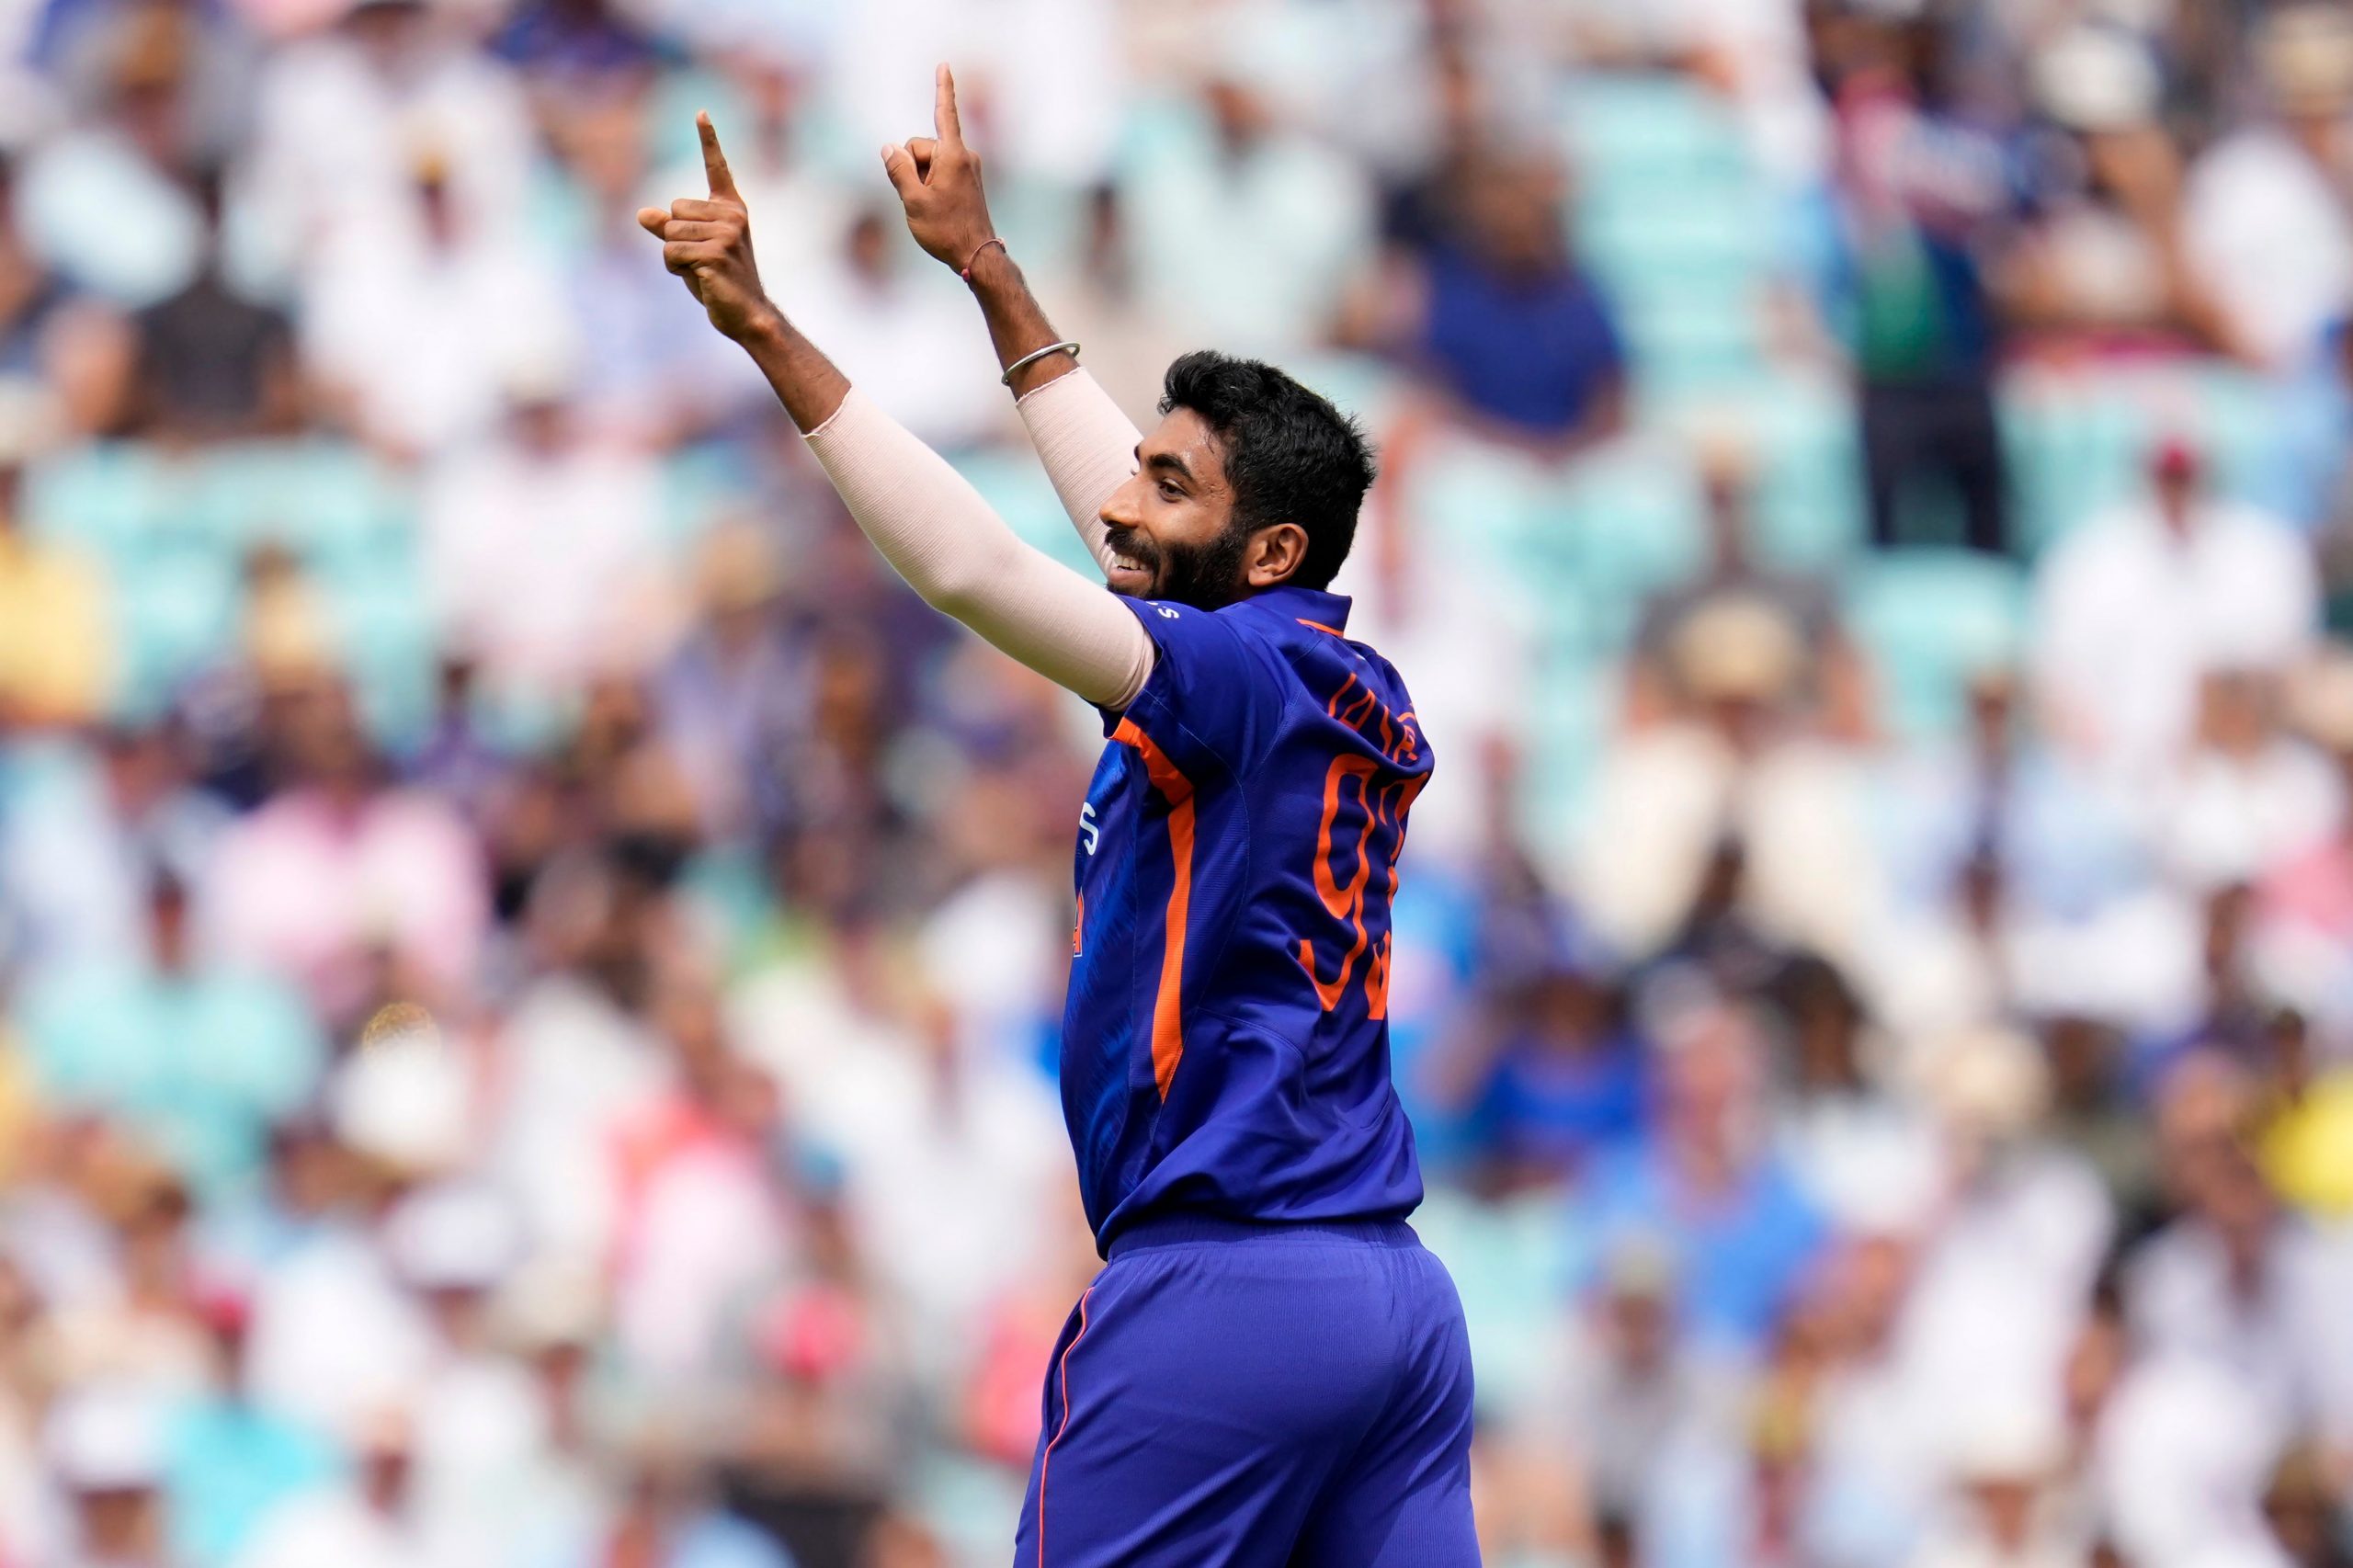 ODI No 1 Bumrah doesn’t get ‘buoyed by praise, bogged by crtiticism’